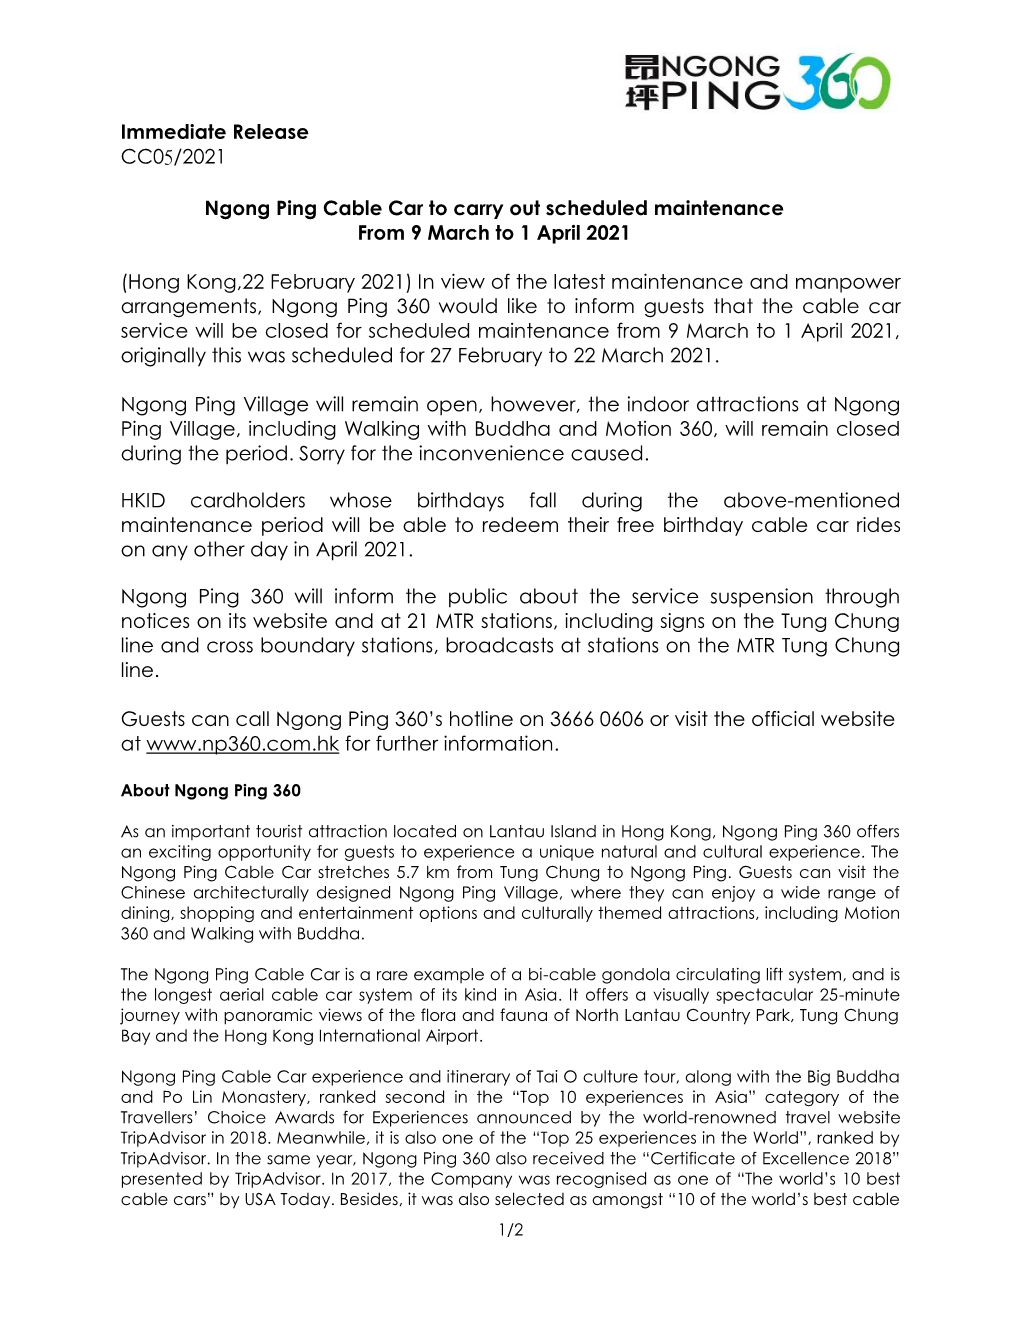 Immediate Release CC05/2021 Ngong Ping Cable Car to Carry Out